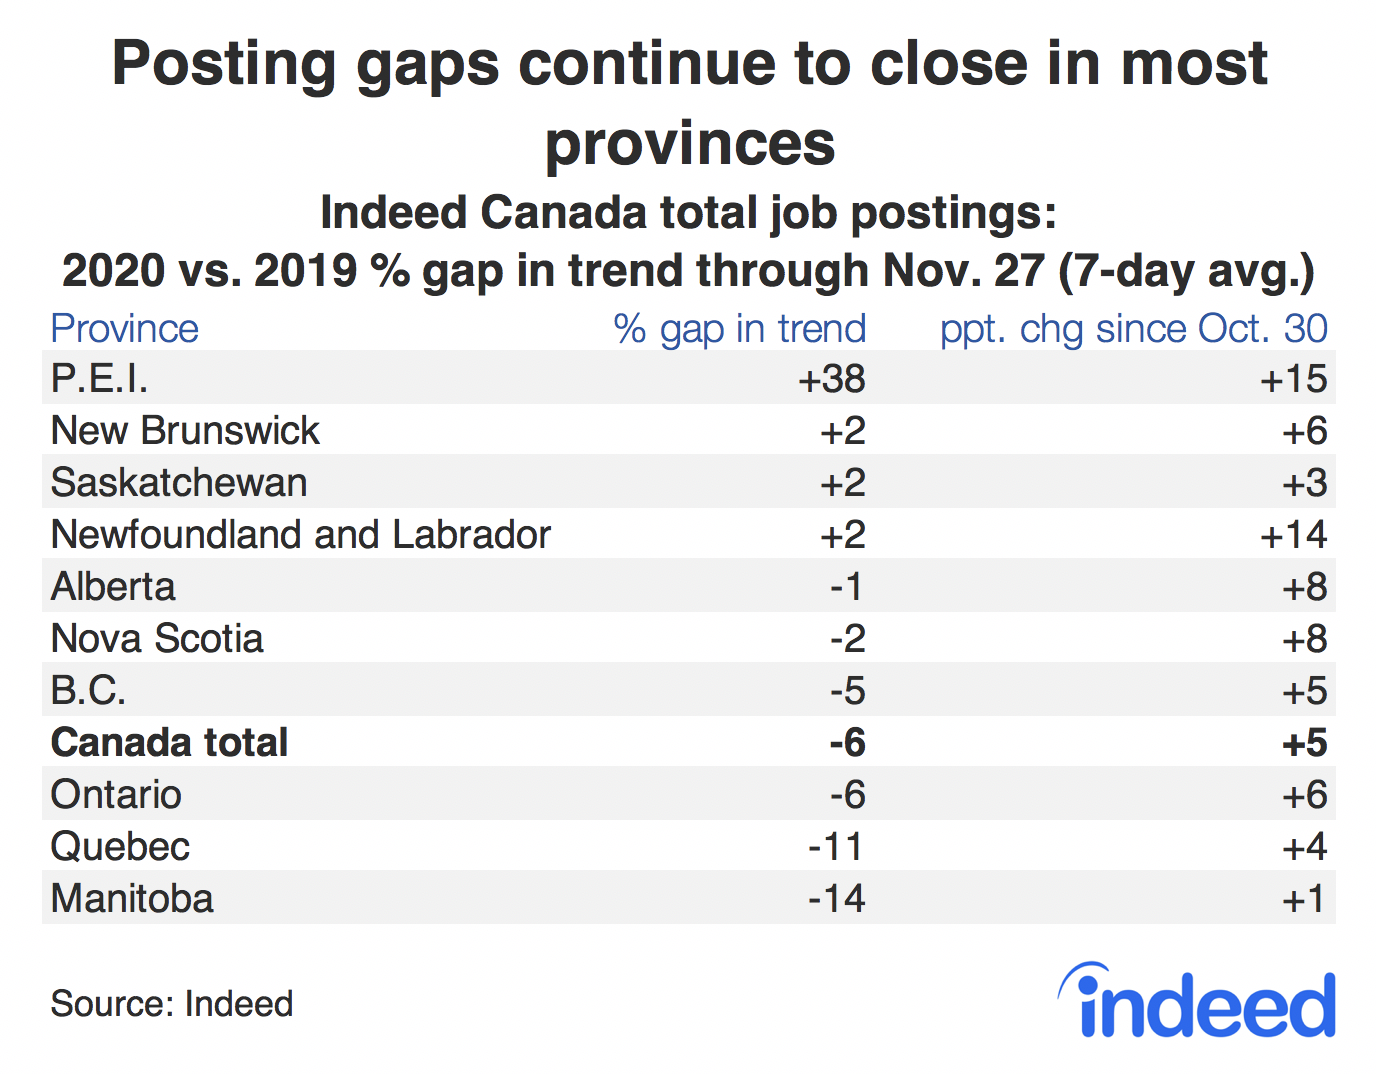 Table showing job posting trends in Canadian provinces.